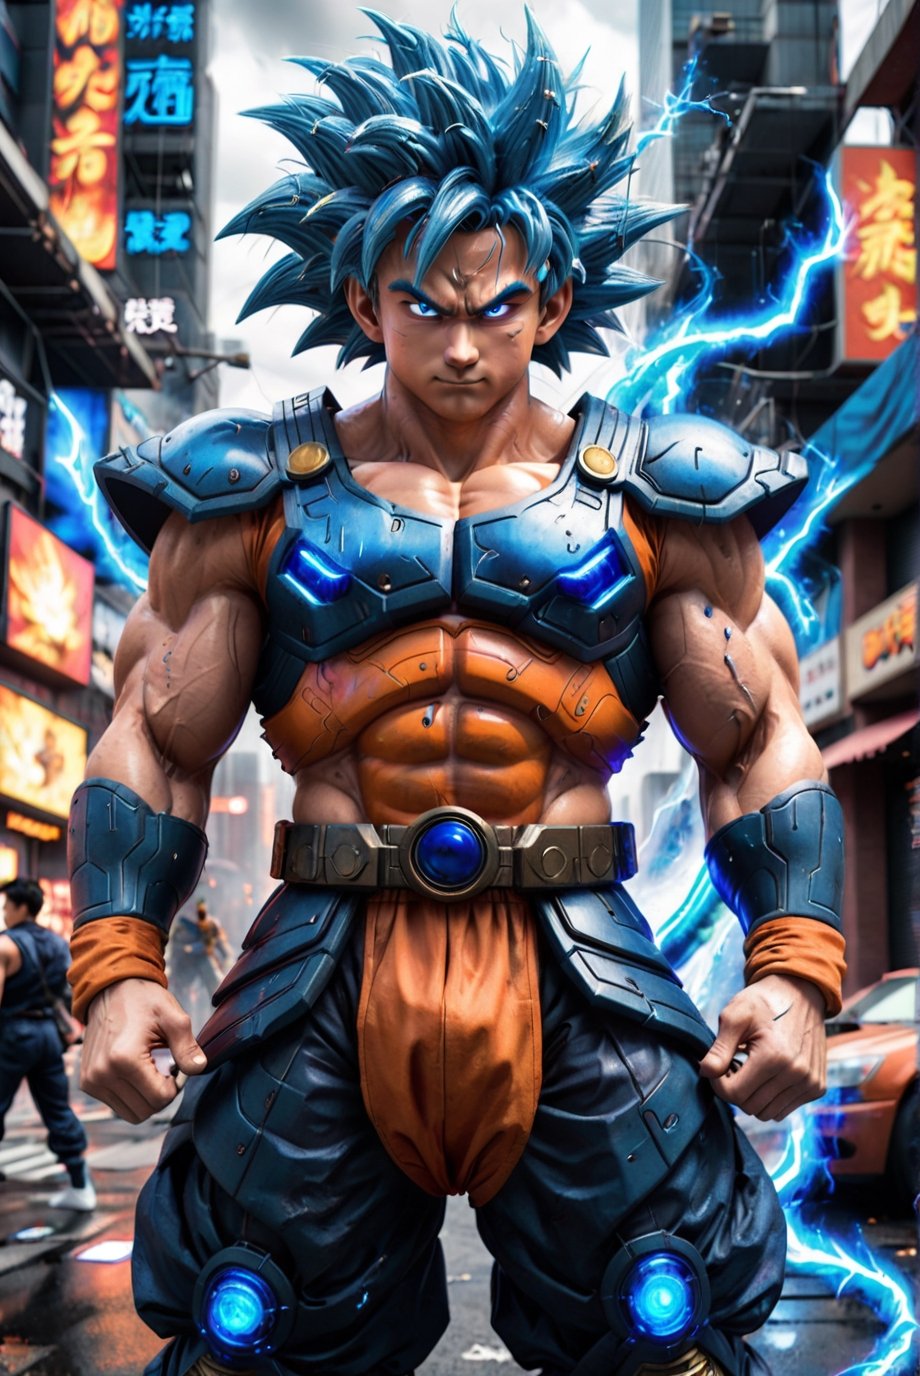 Super detailed live-action Dragon Ball Goku, strong exaggerated body, surrounded by blue energy, wearing armor, cyberpunk city, movie environment.